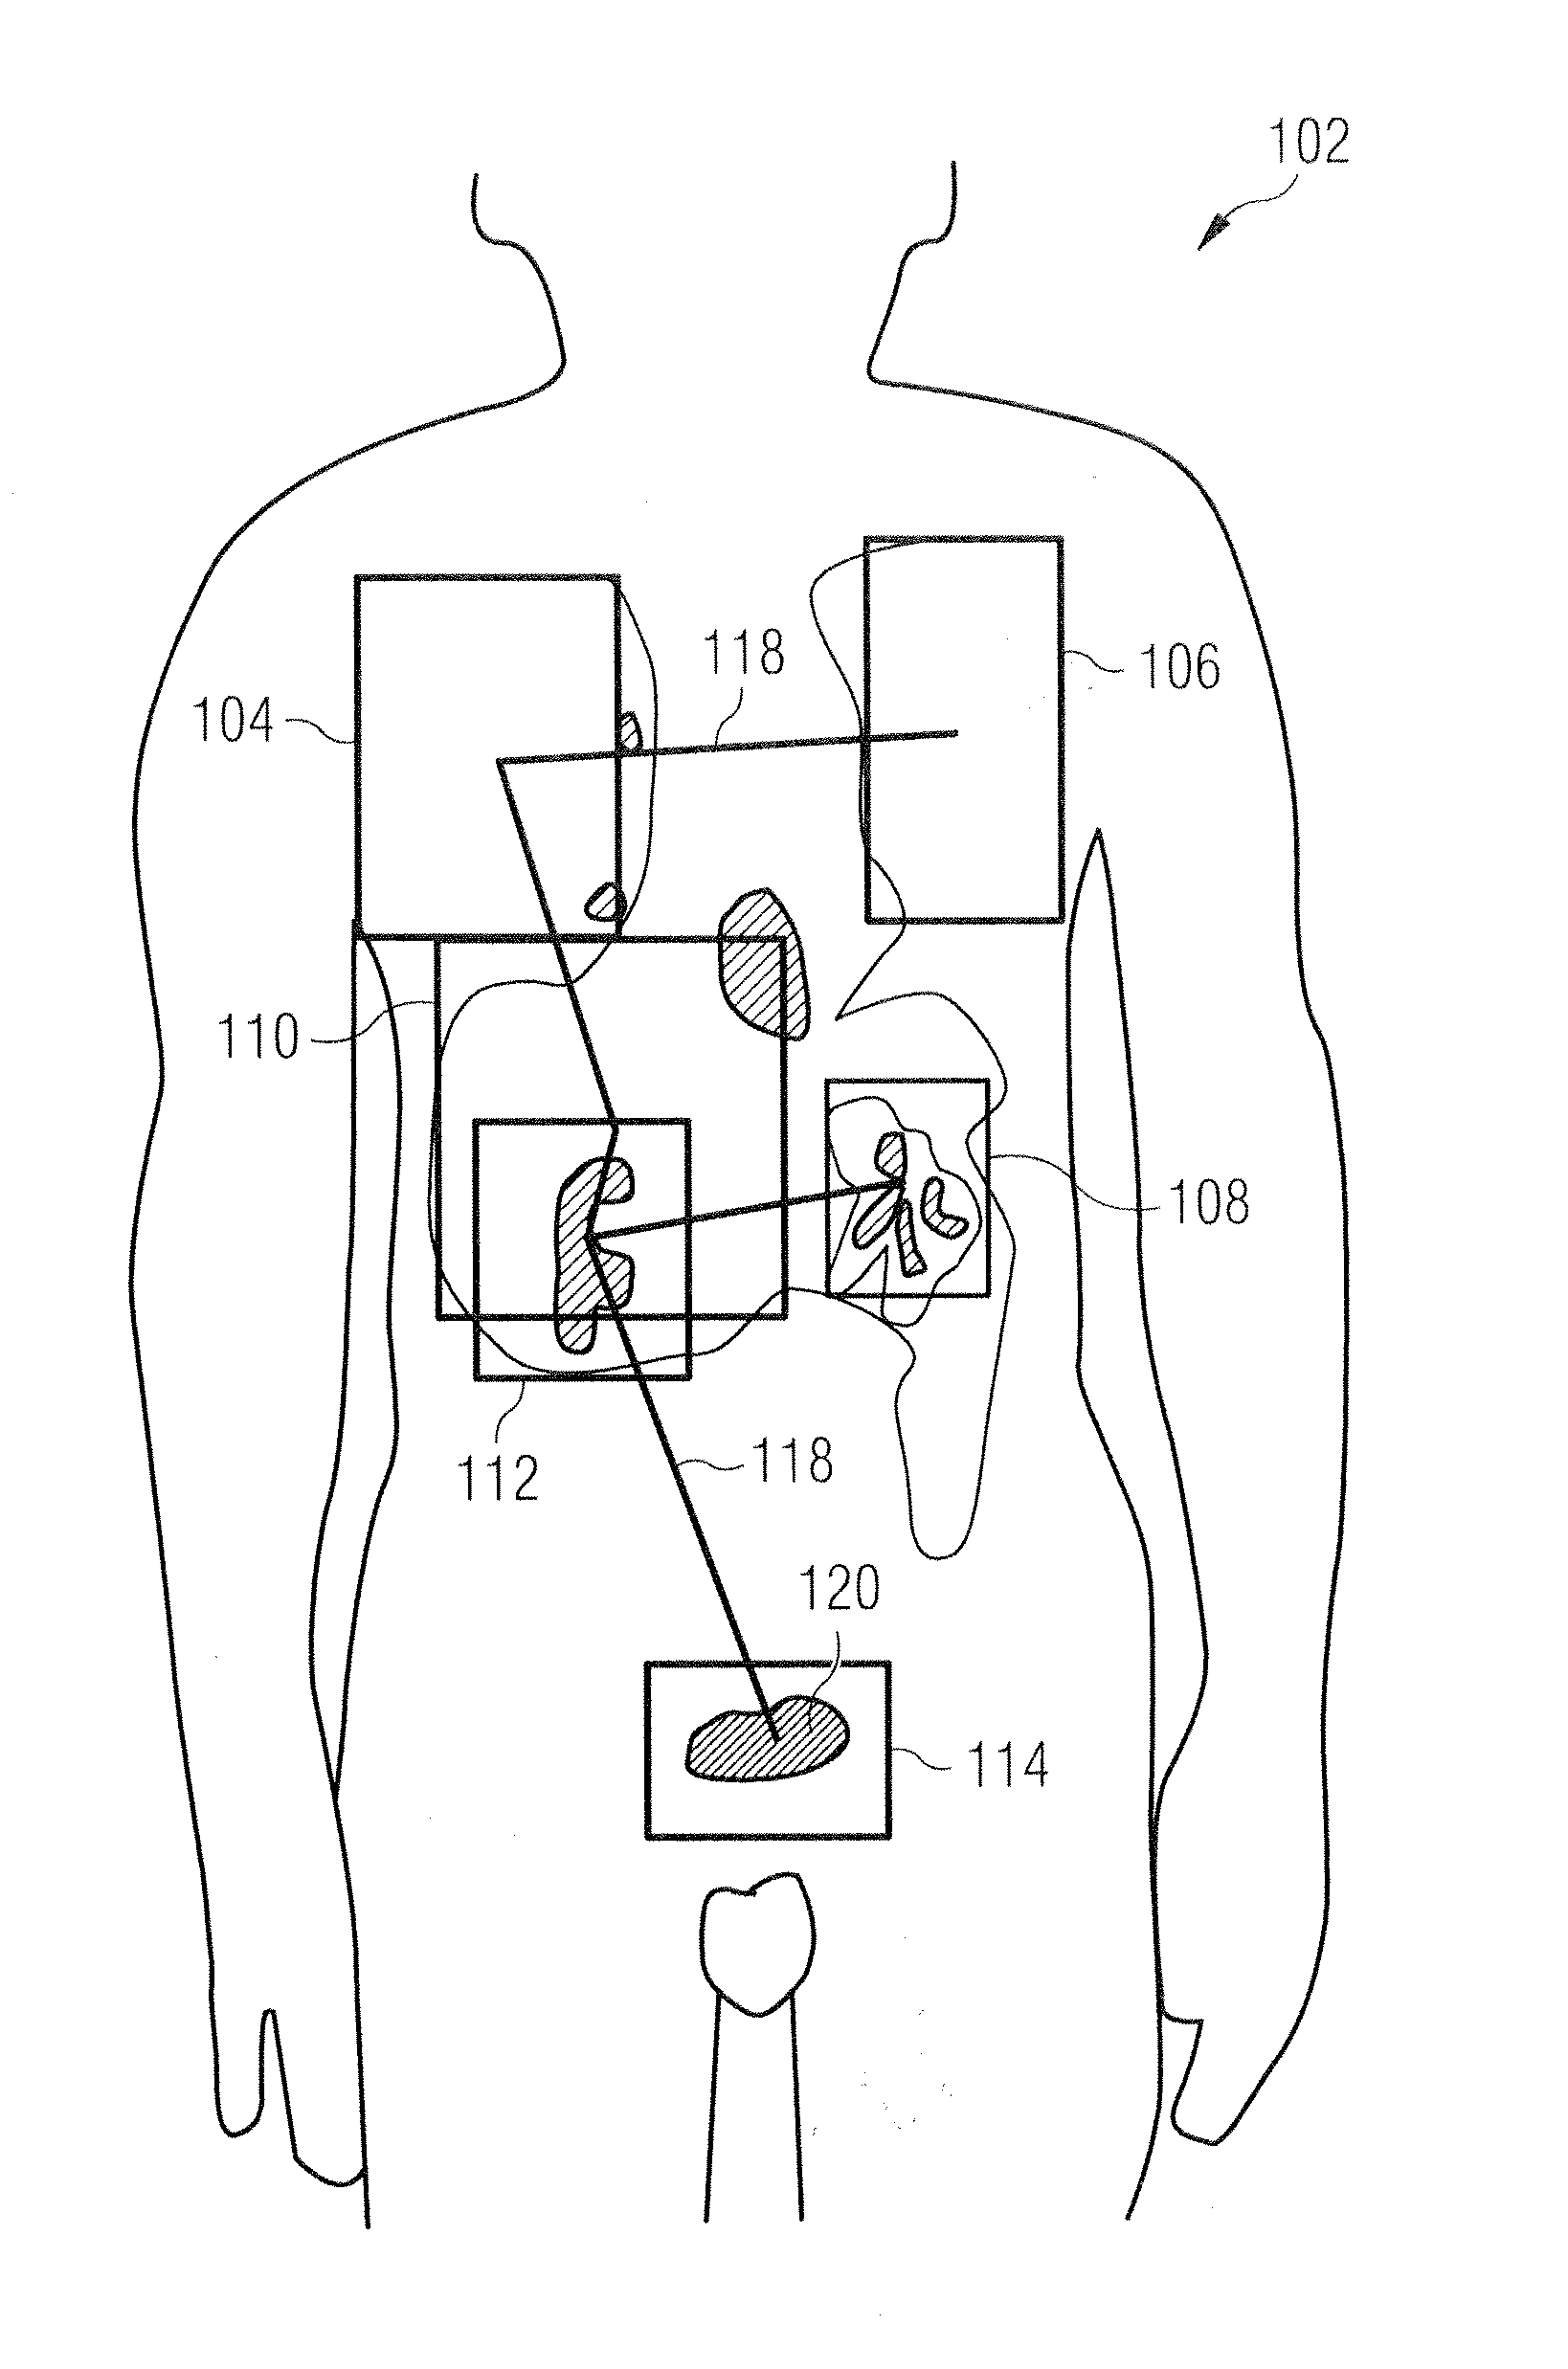 Methods and apparatus for registration of medical images